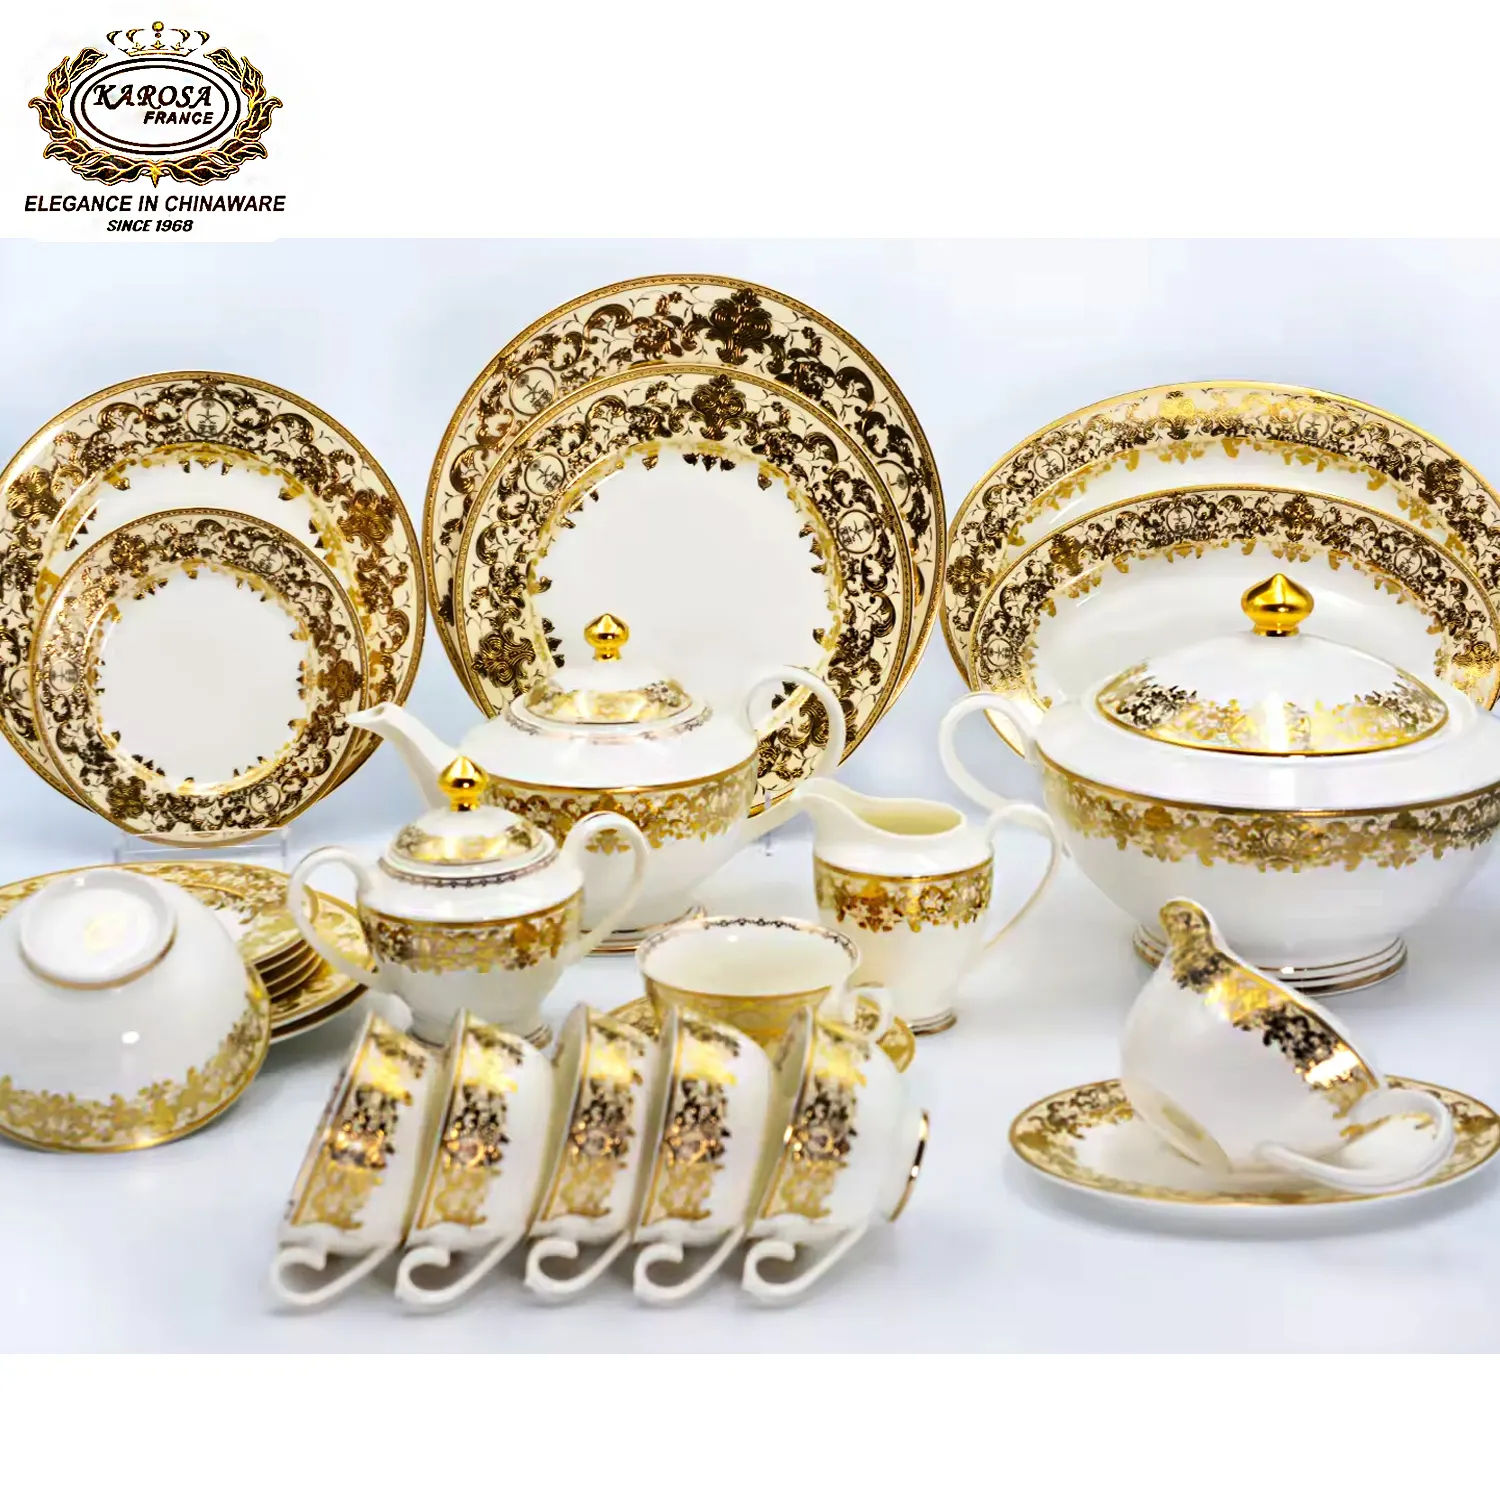 98 pcs Hight quality embossed pure gold decoration royal style porcelain bone china tableware dinnerware dinner sets